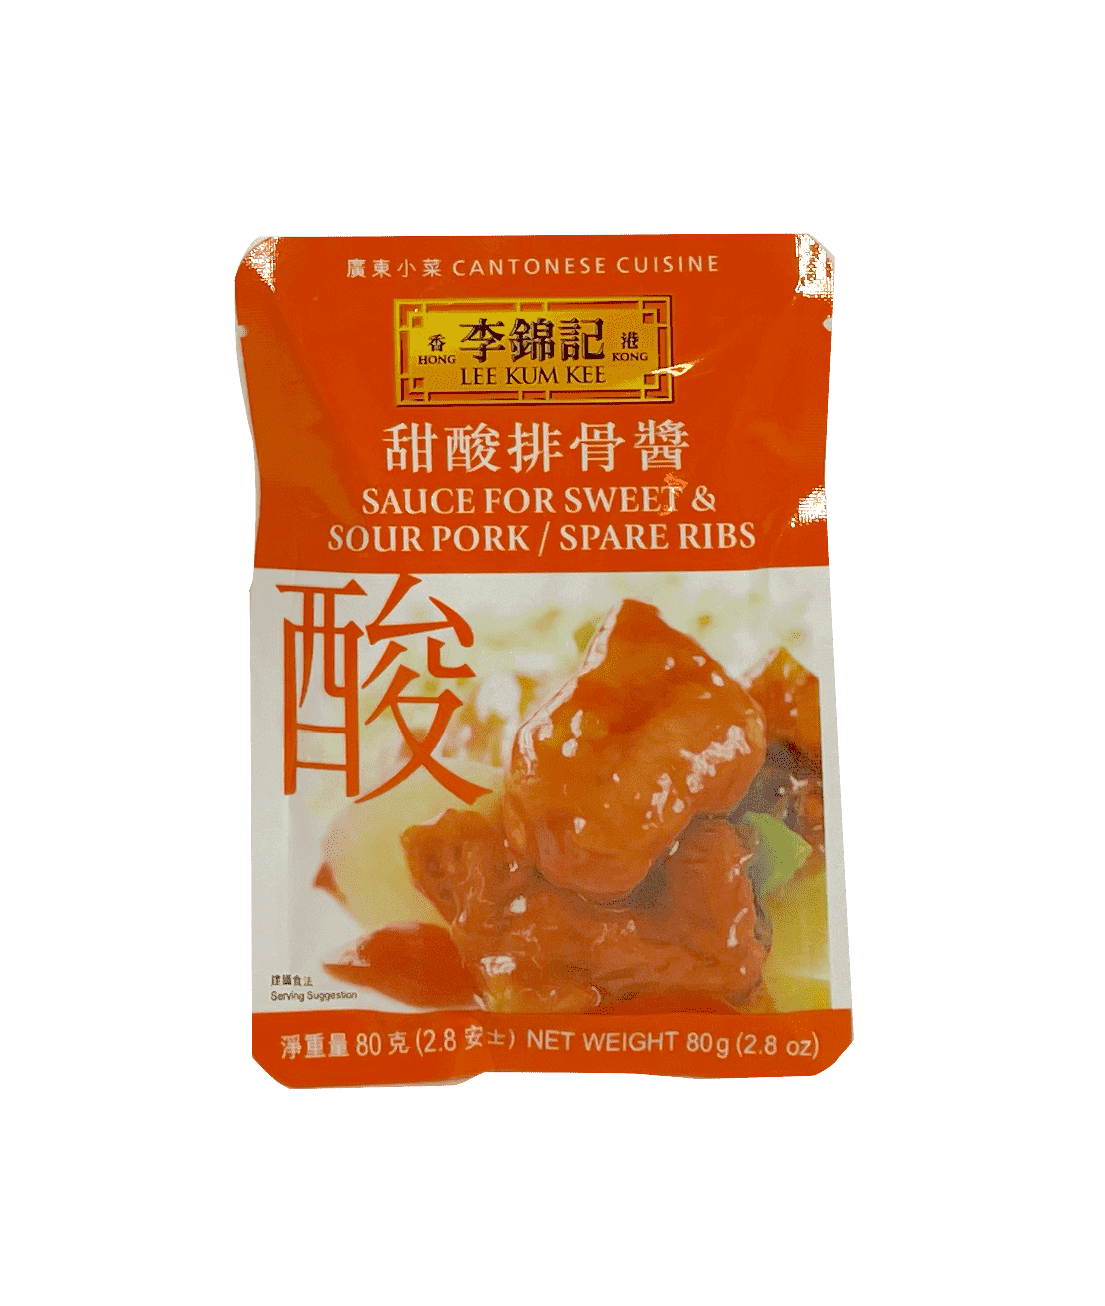 Best Before: 2022.11.19 Sauce for Sweet & Sour Pork/ Spare Ribs 80g LKK China